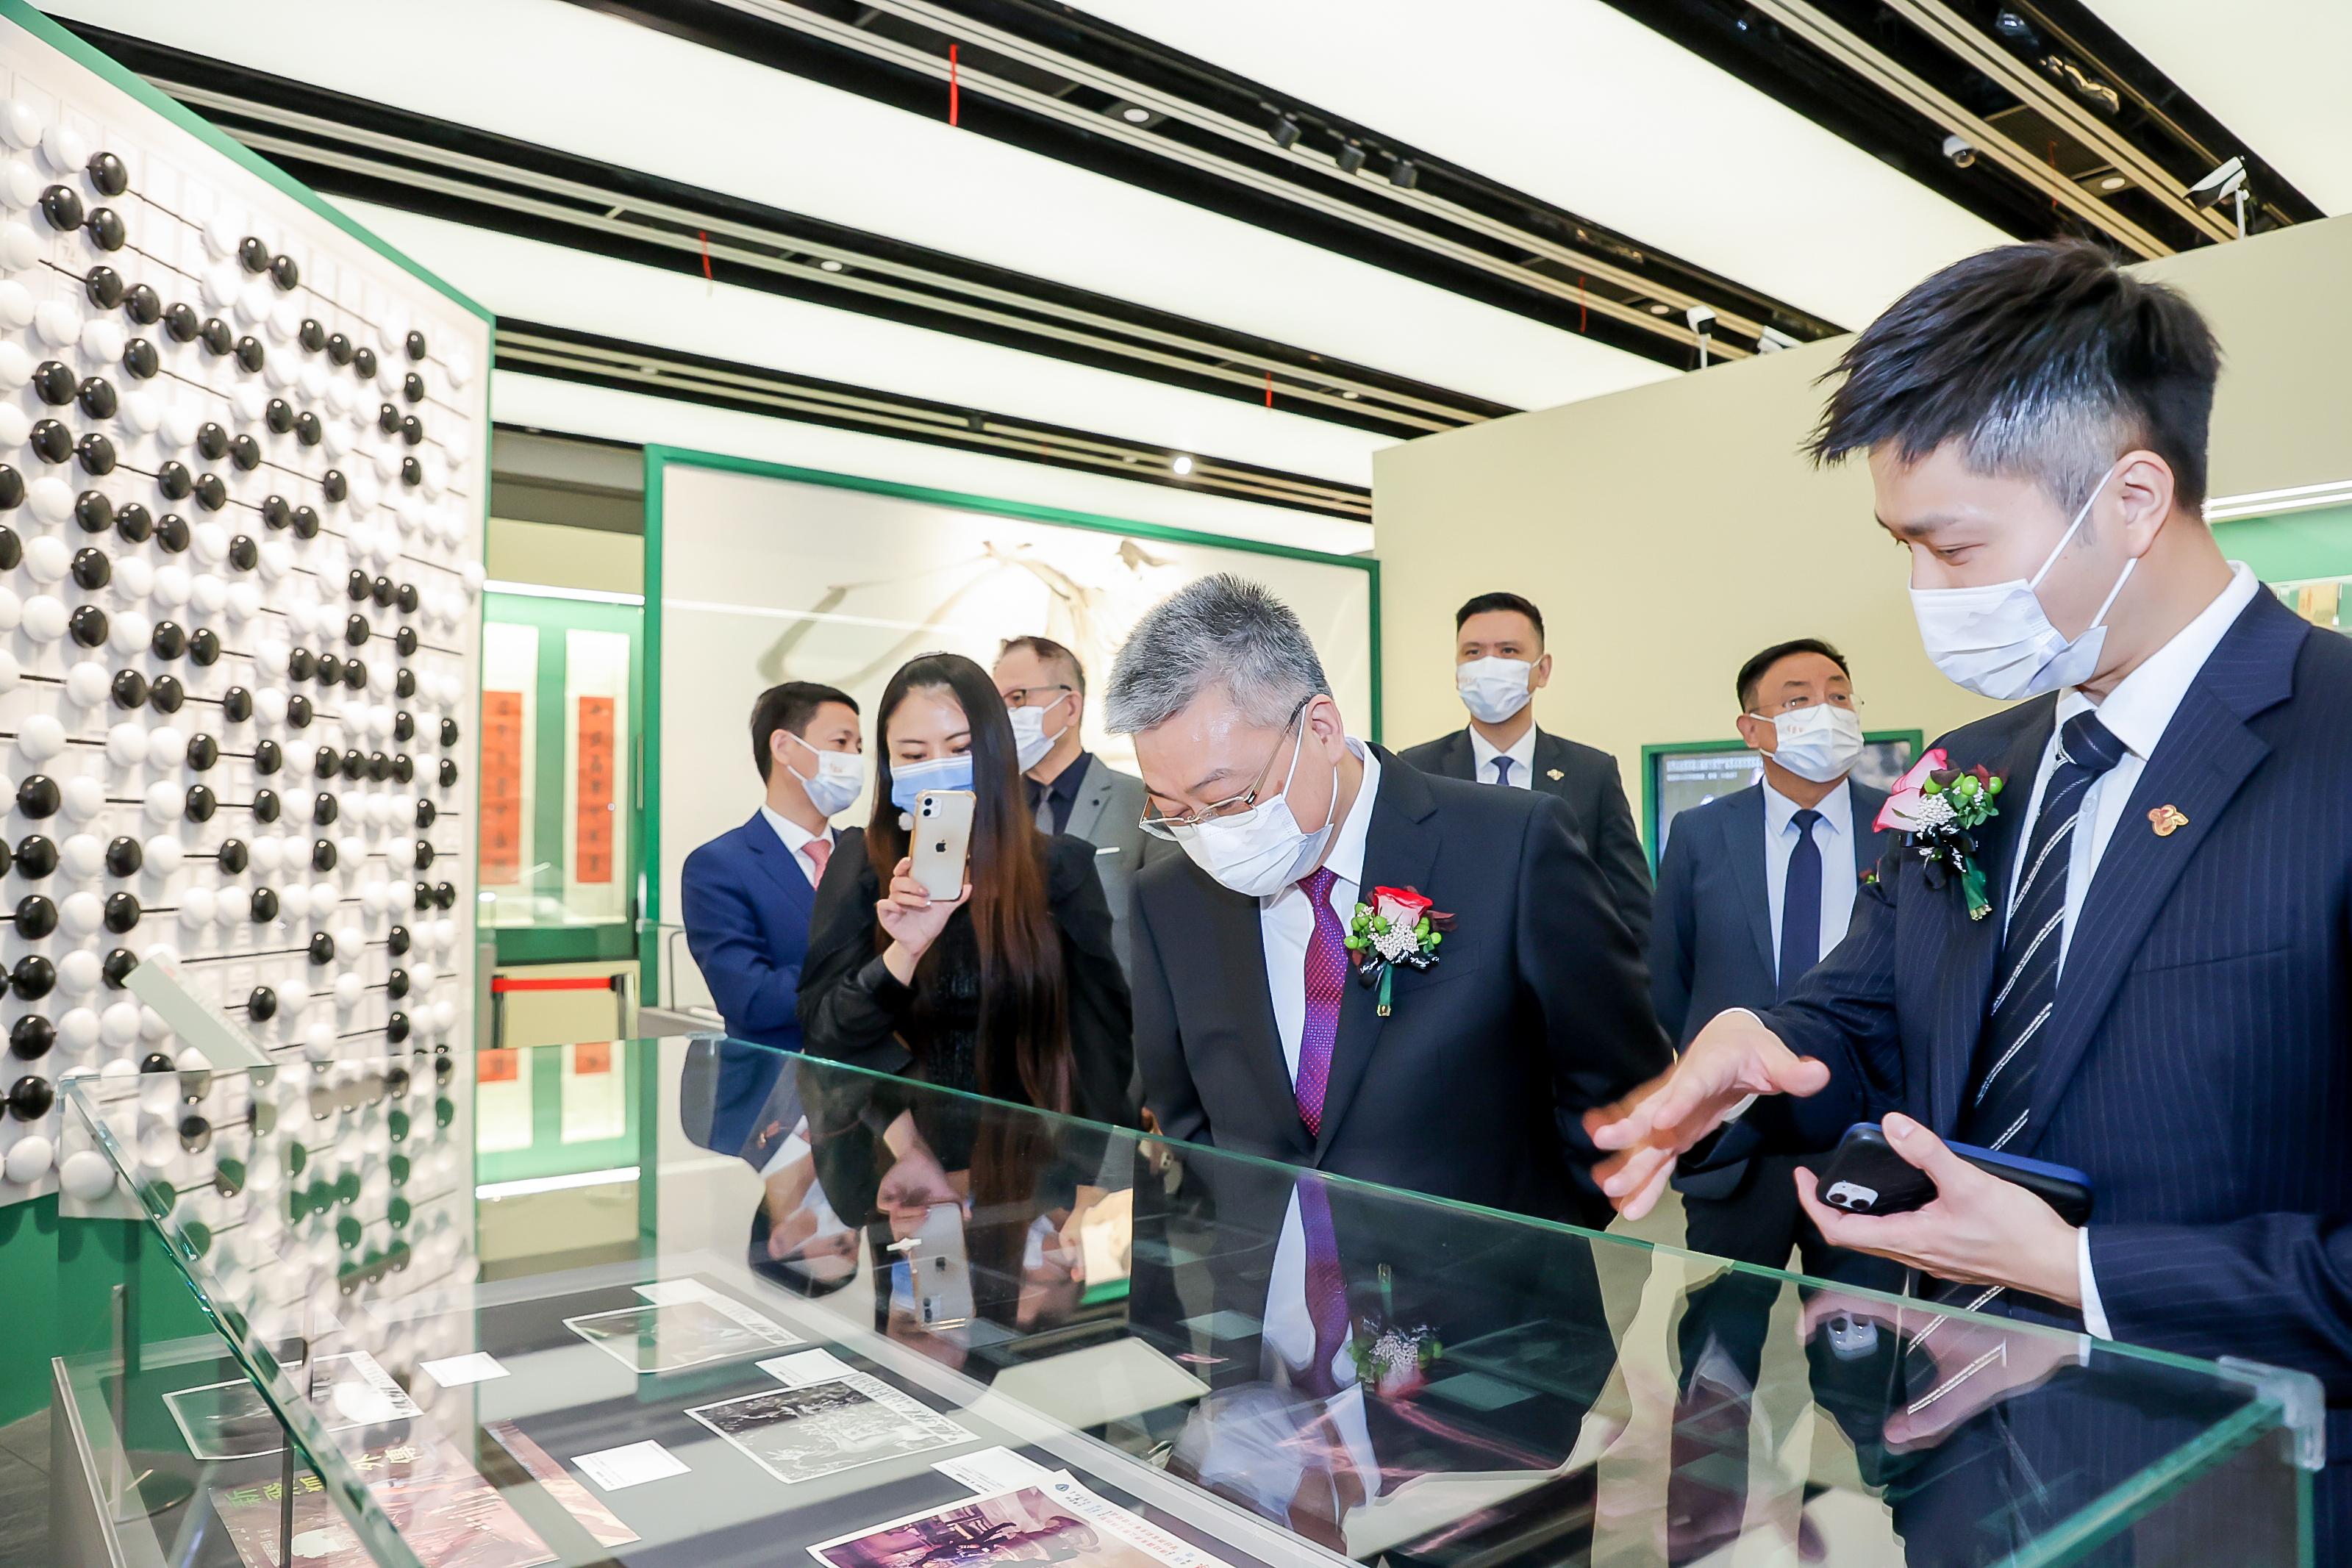 "Jin Yong Exhibition", organised by the Hong Kong Economic and Trade Office in Shanghai (SHETO), was unveiled today (October 28) at Shanghai Library East in Shanghai. Photo shows the Acting Director of the SHETO, Mr Kelvin Lo (first right), touring the exhibition with the Director General of the Hong Kong and Macao Affairs Office of the Shanghai Municipal Government, Mr Zhang Xiaosong (second right), and other guests.